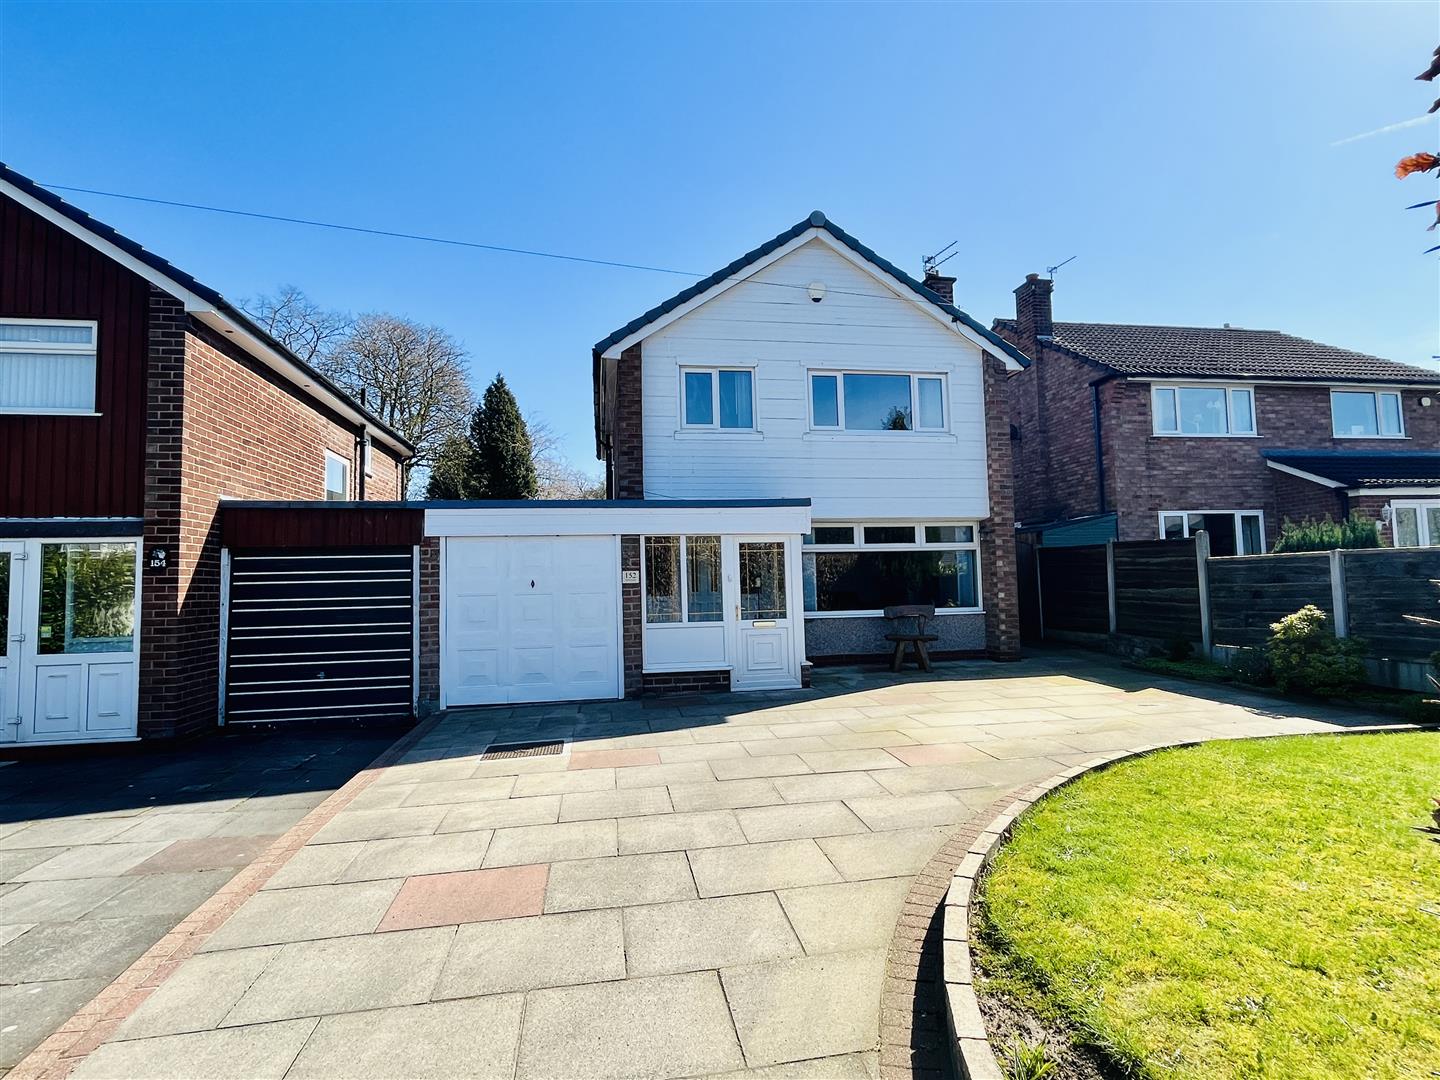 3 bed detached house for sale in Grove Lane, Altrincham - Property Image 1